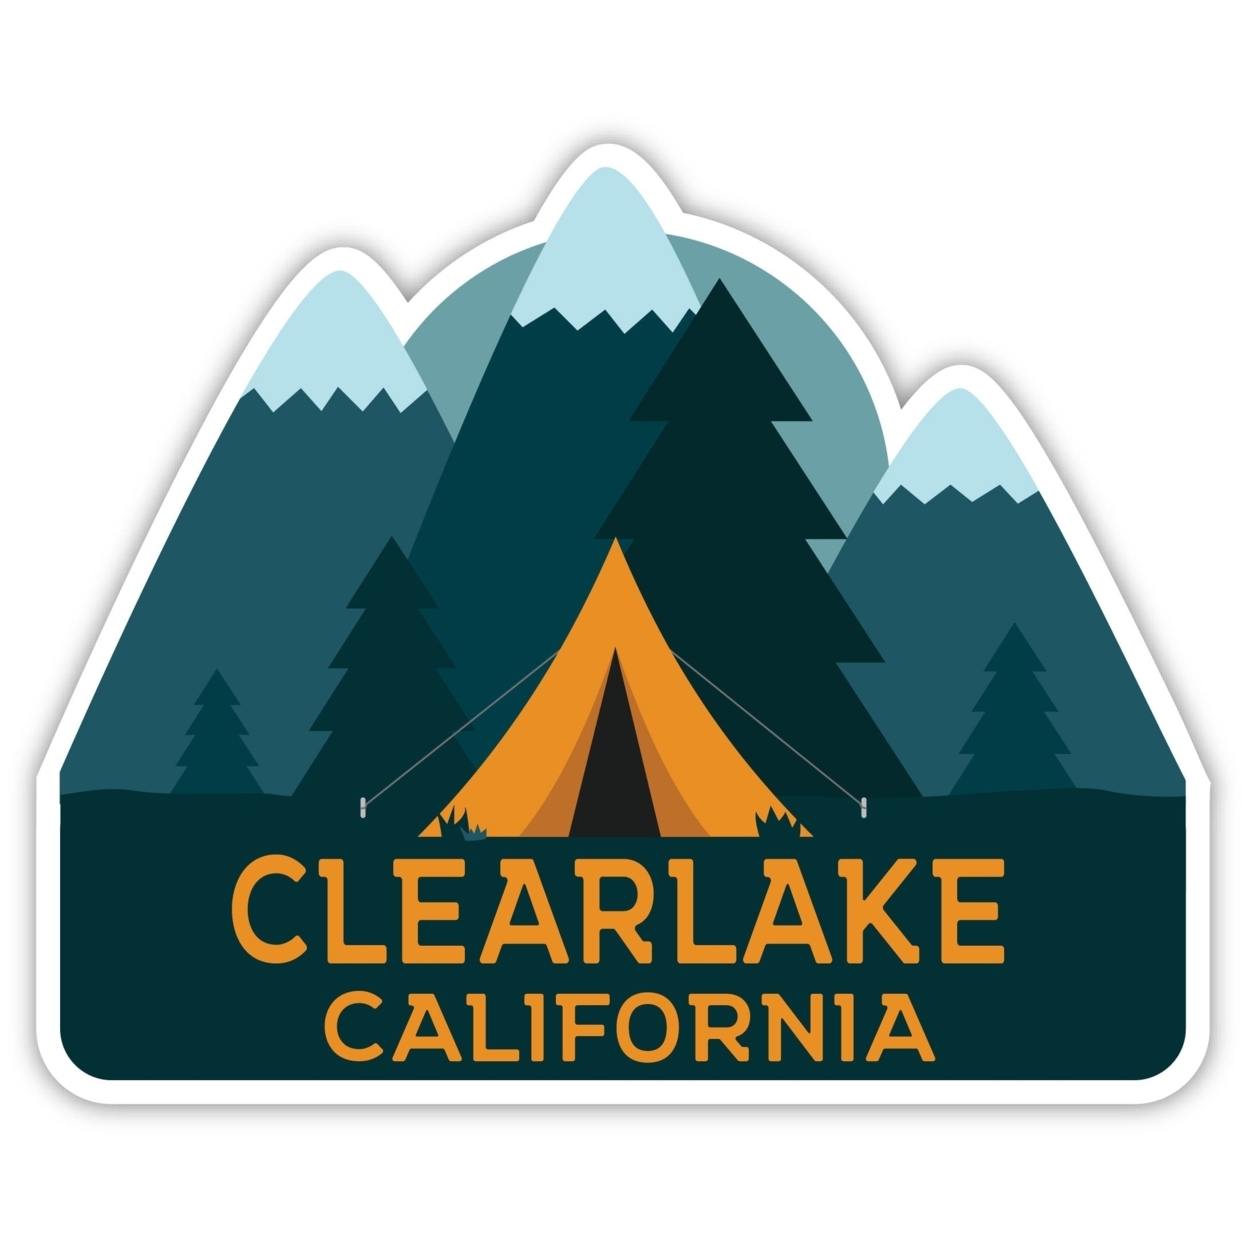 Clearlake California Souvenir Decorative Stickers (Choose Theme And Size) - Single Unit, 6-Inch, Great Outdoors